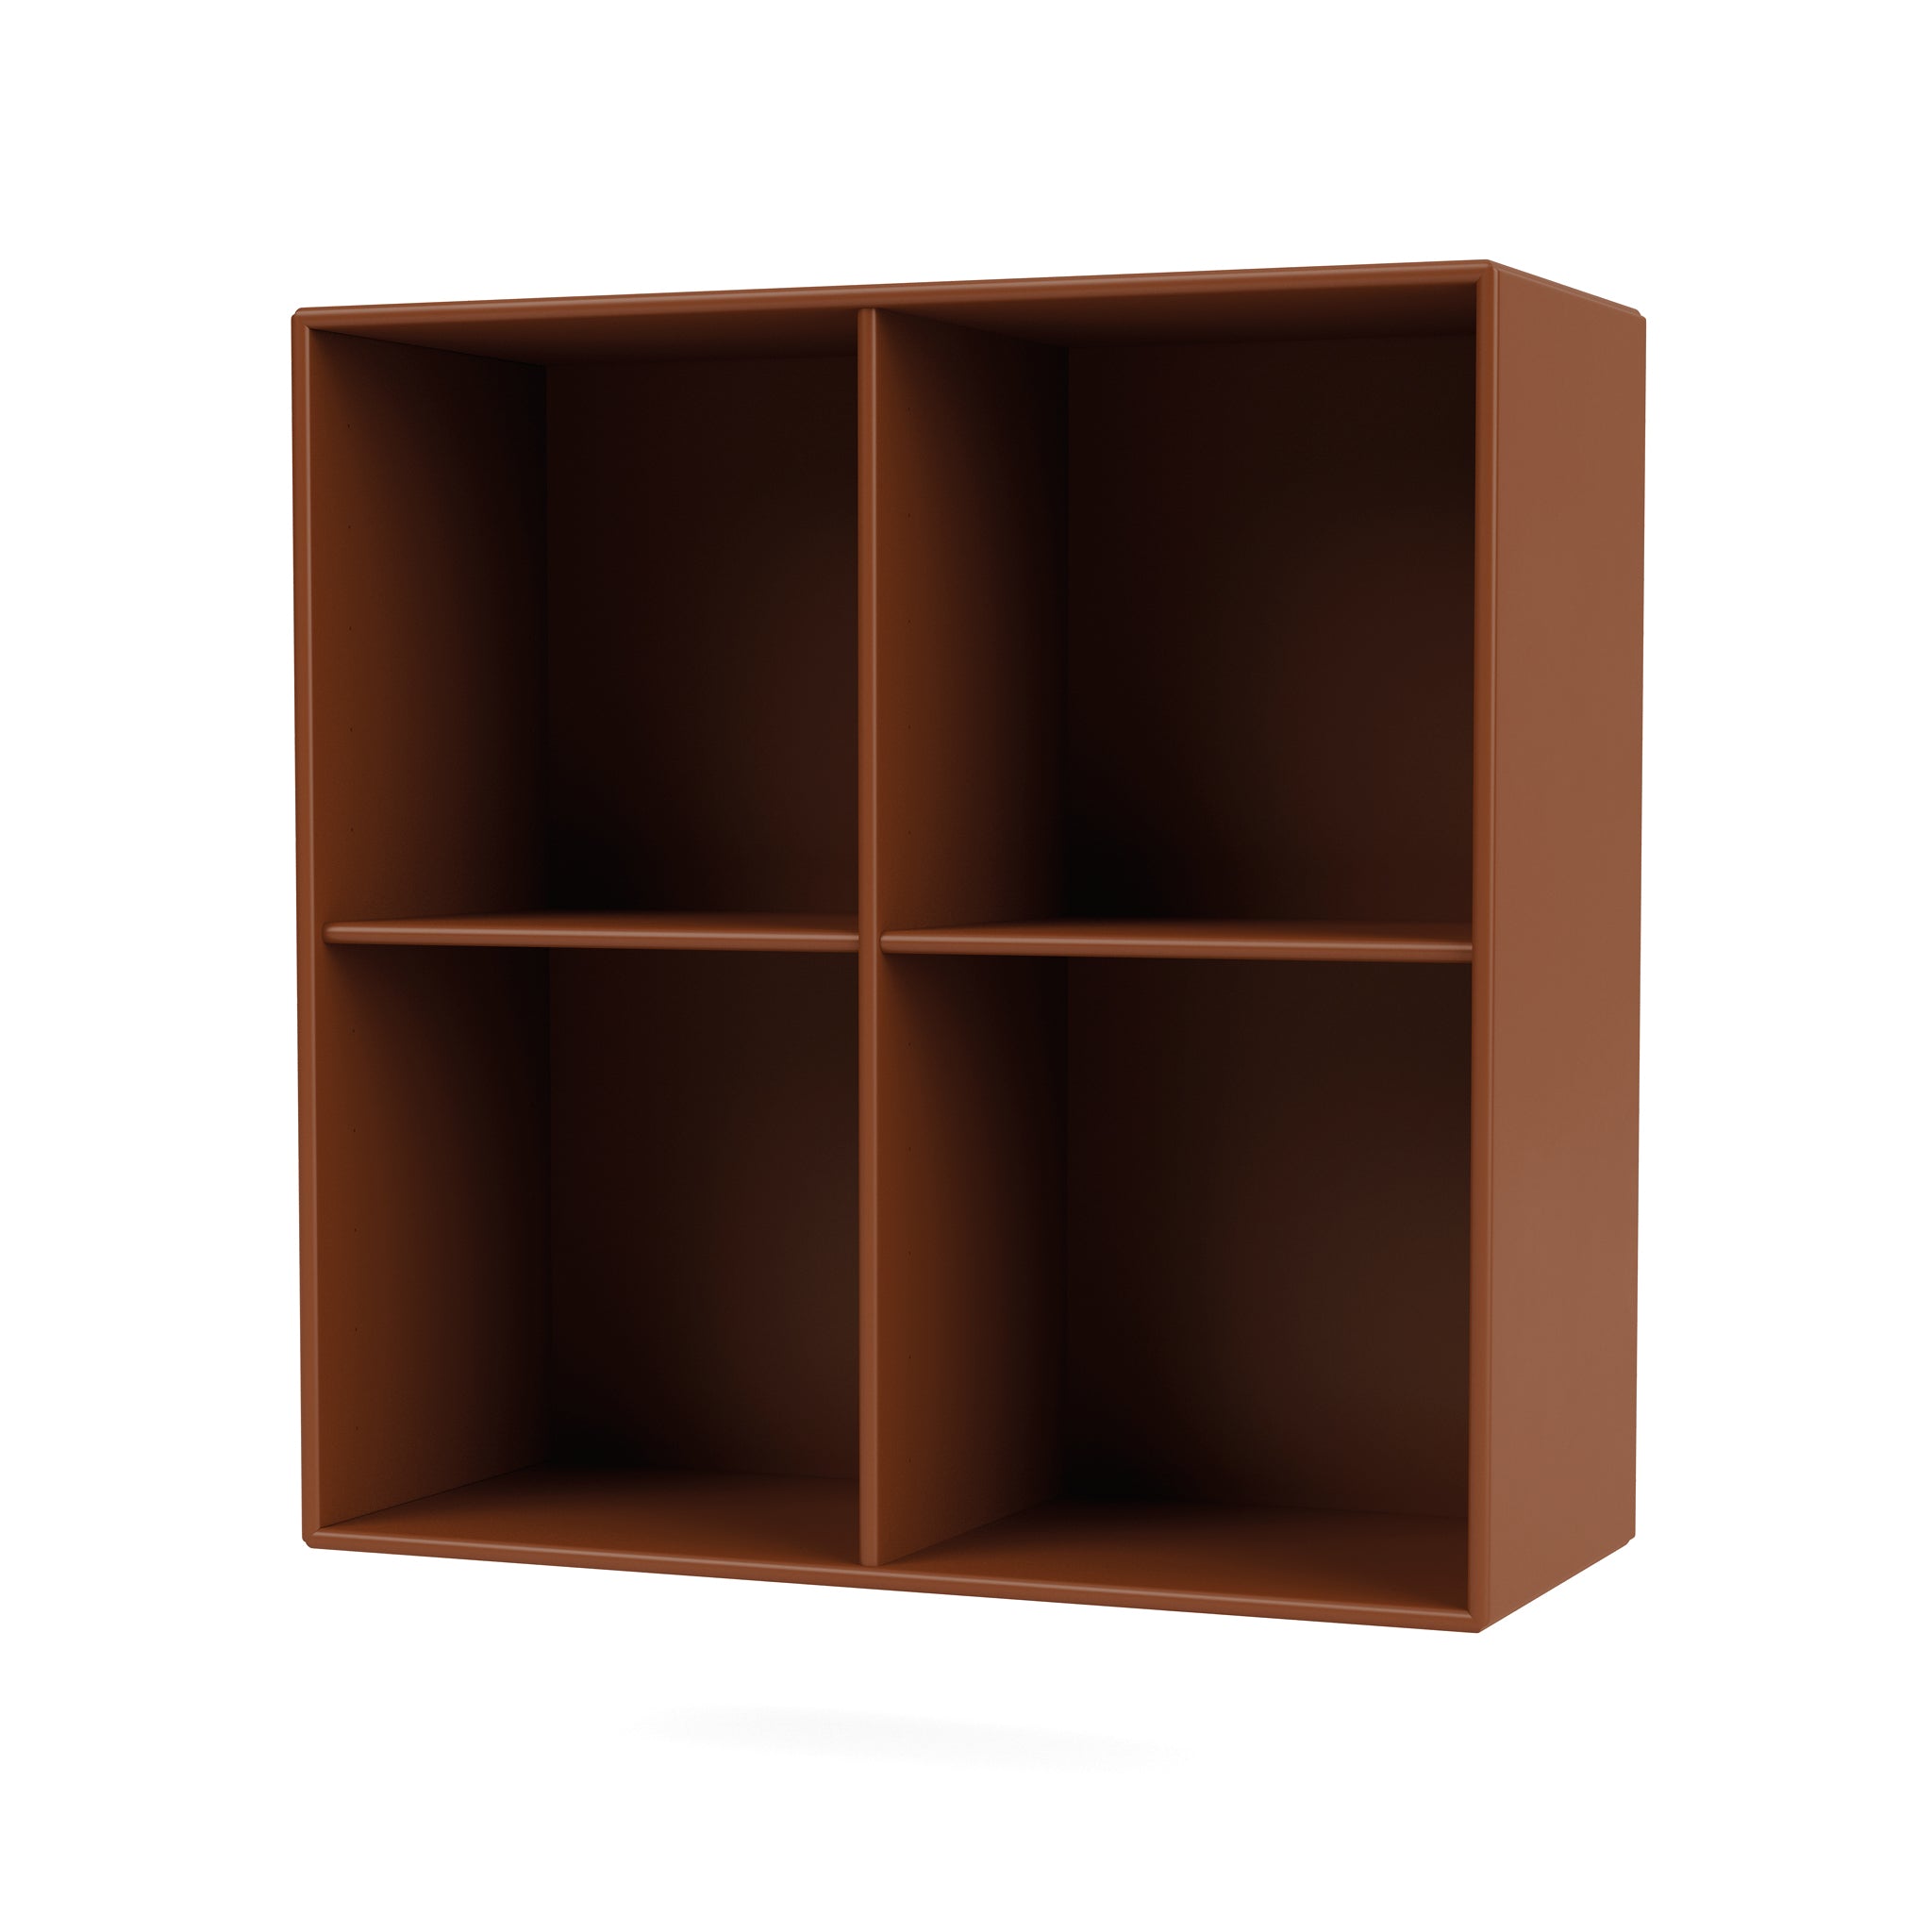 Show Bookcase by Montana Furniture